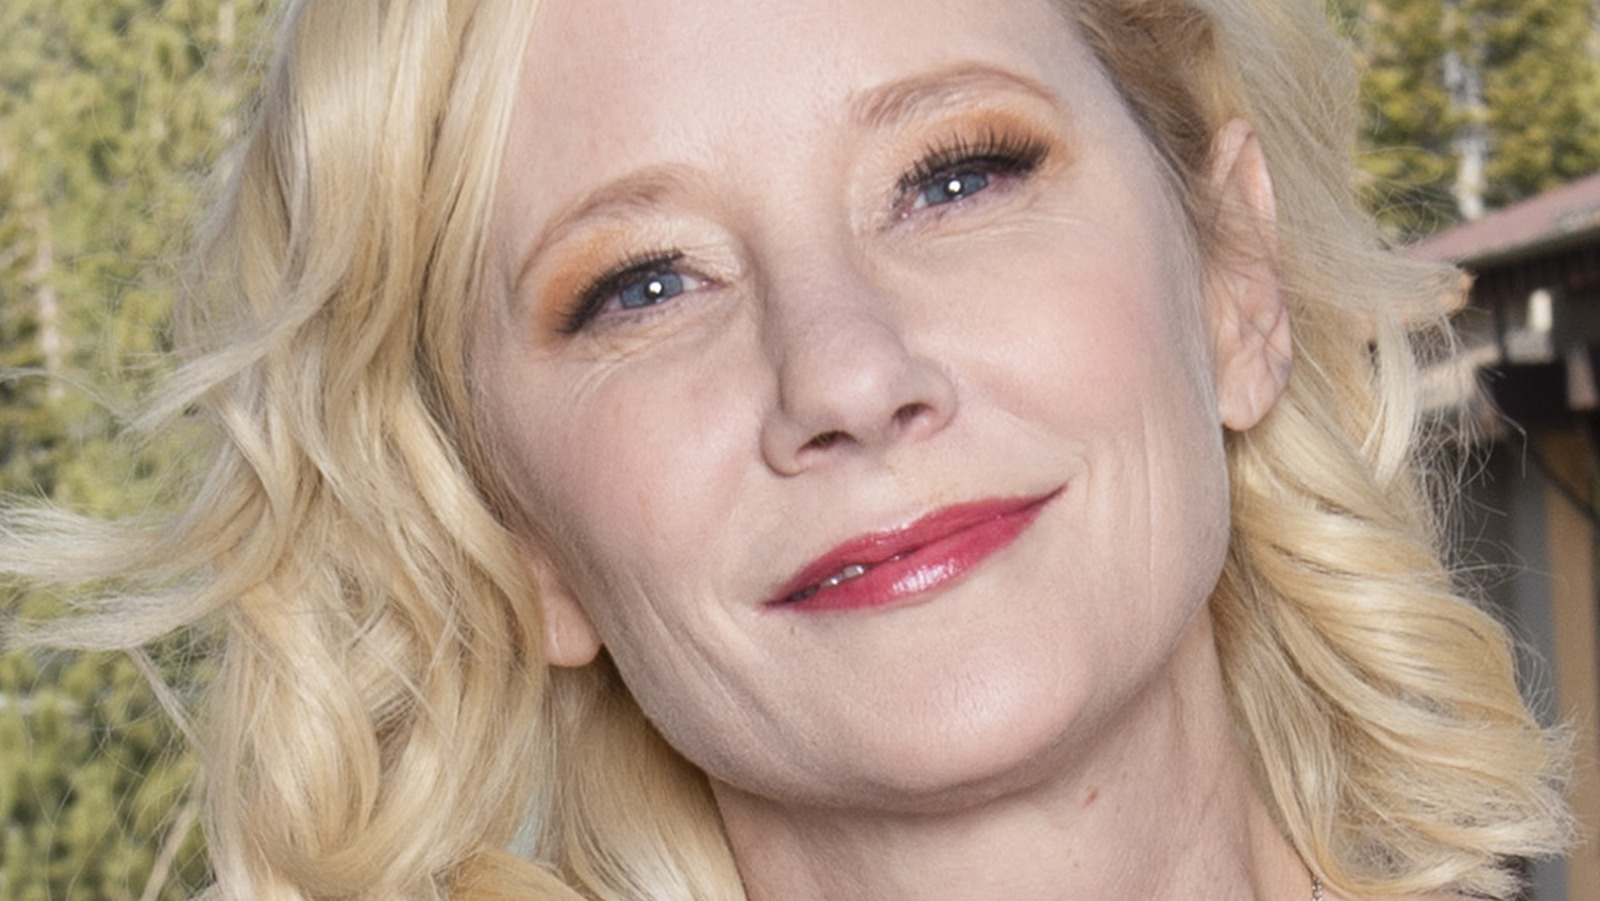 Lawyer Says Anne Heche’s Child Could Facing Potential Problems in Bid for Actor’s Estate